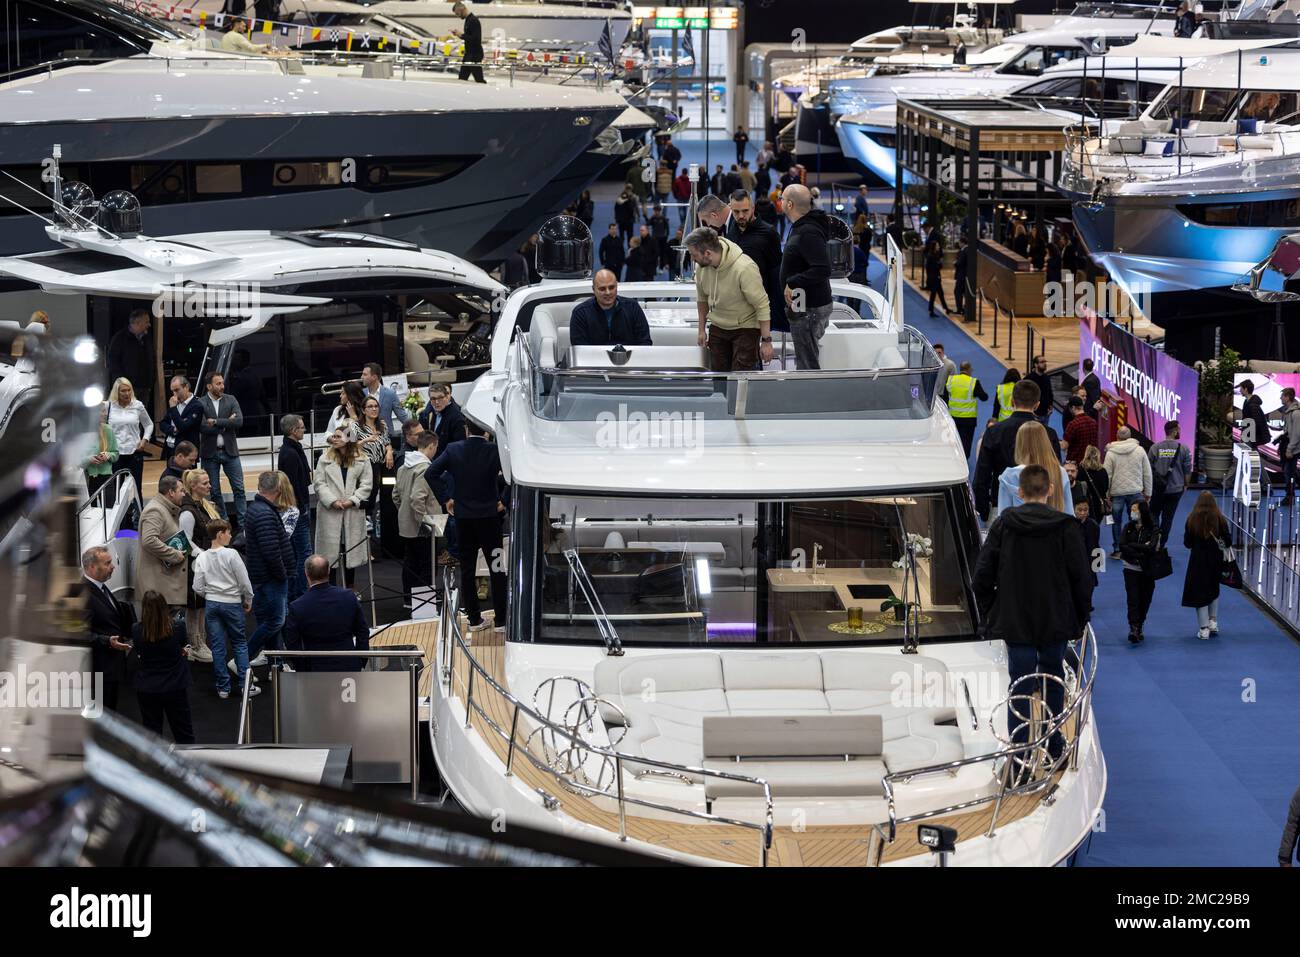 Duesseldorf, Germany. 21st Jan, 2023. Visitors look at a motor yacht in an exhibition hall. After a two-year break from Corona, the boot water sports trade show has opened its doors again. Until January 29, around 1,500 exhibitors from 68 countries will be showing their products and services in 16 halls at the Düsseldorf exhibition center. Credit: Christoph Reichwein/dpa/Alamy Live News Stock Photo